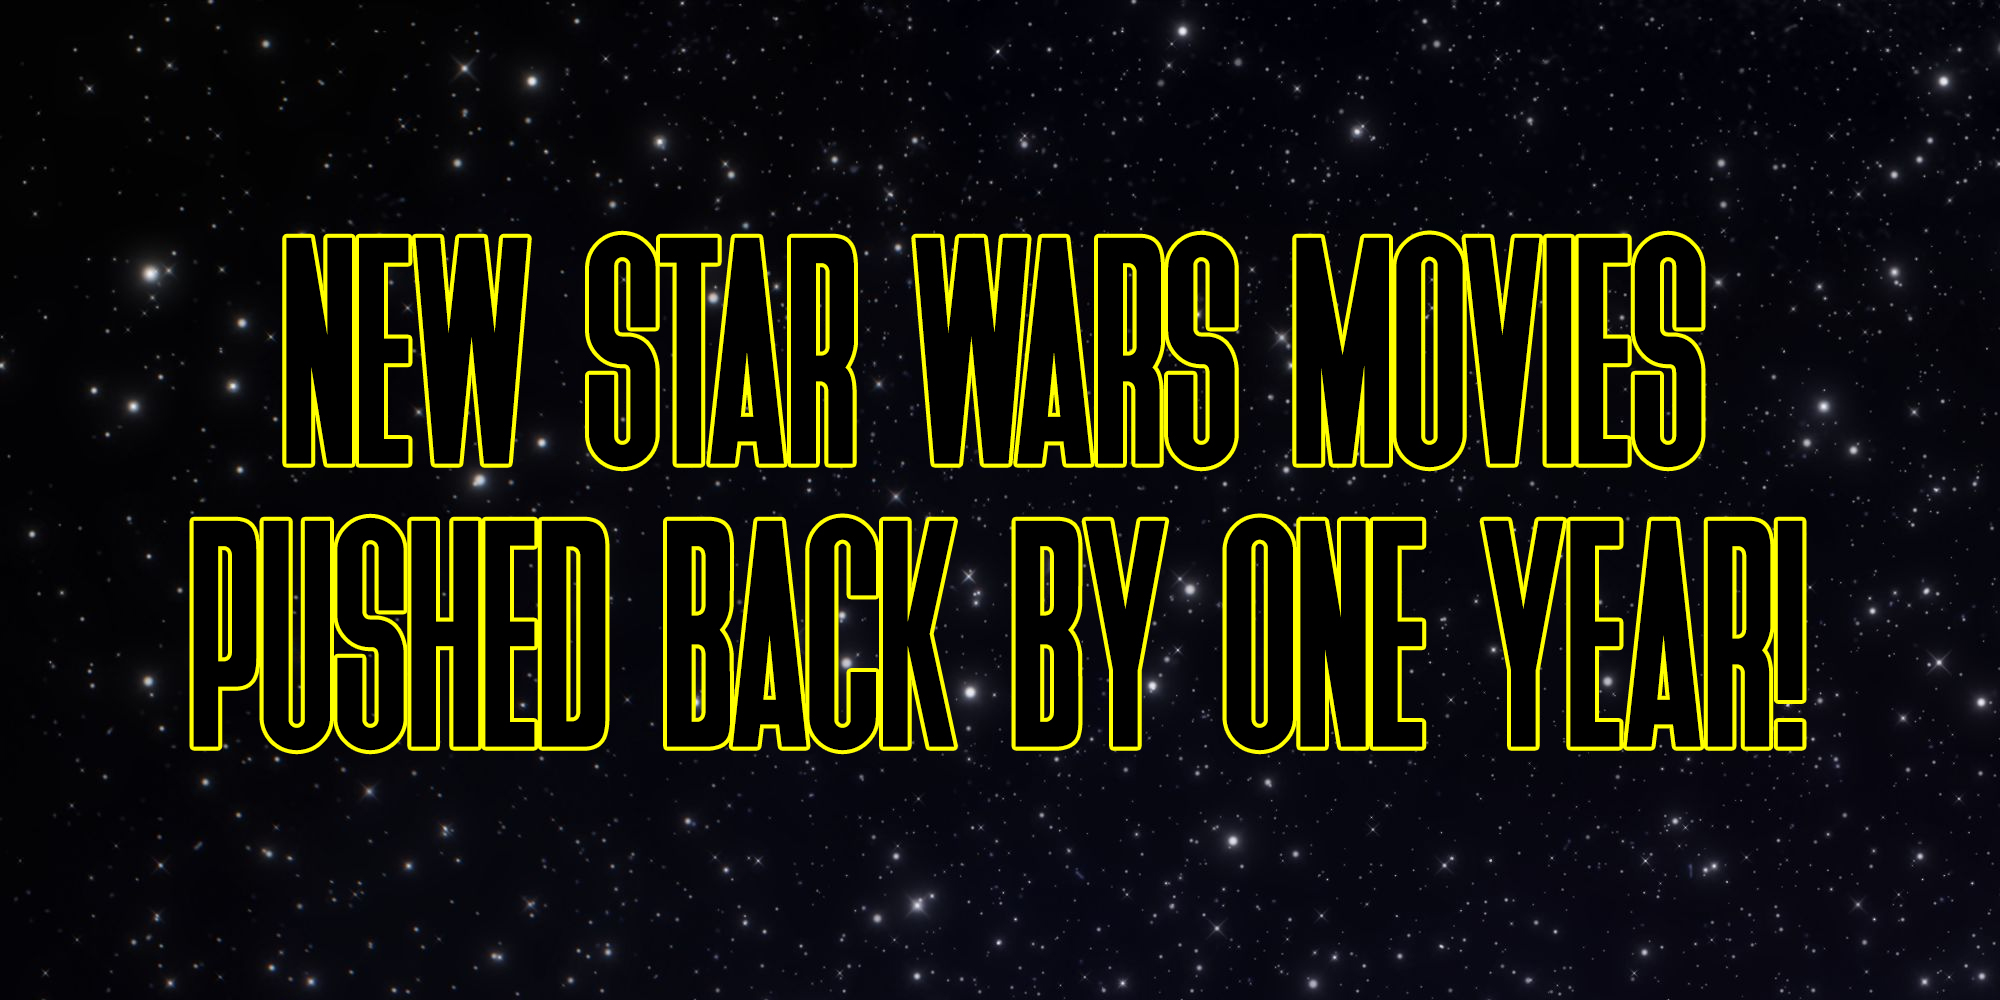 New Star Wars Movies Pushed Back One Year